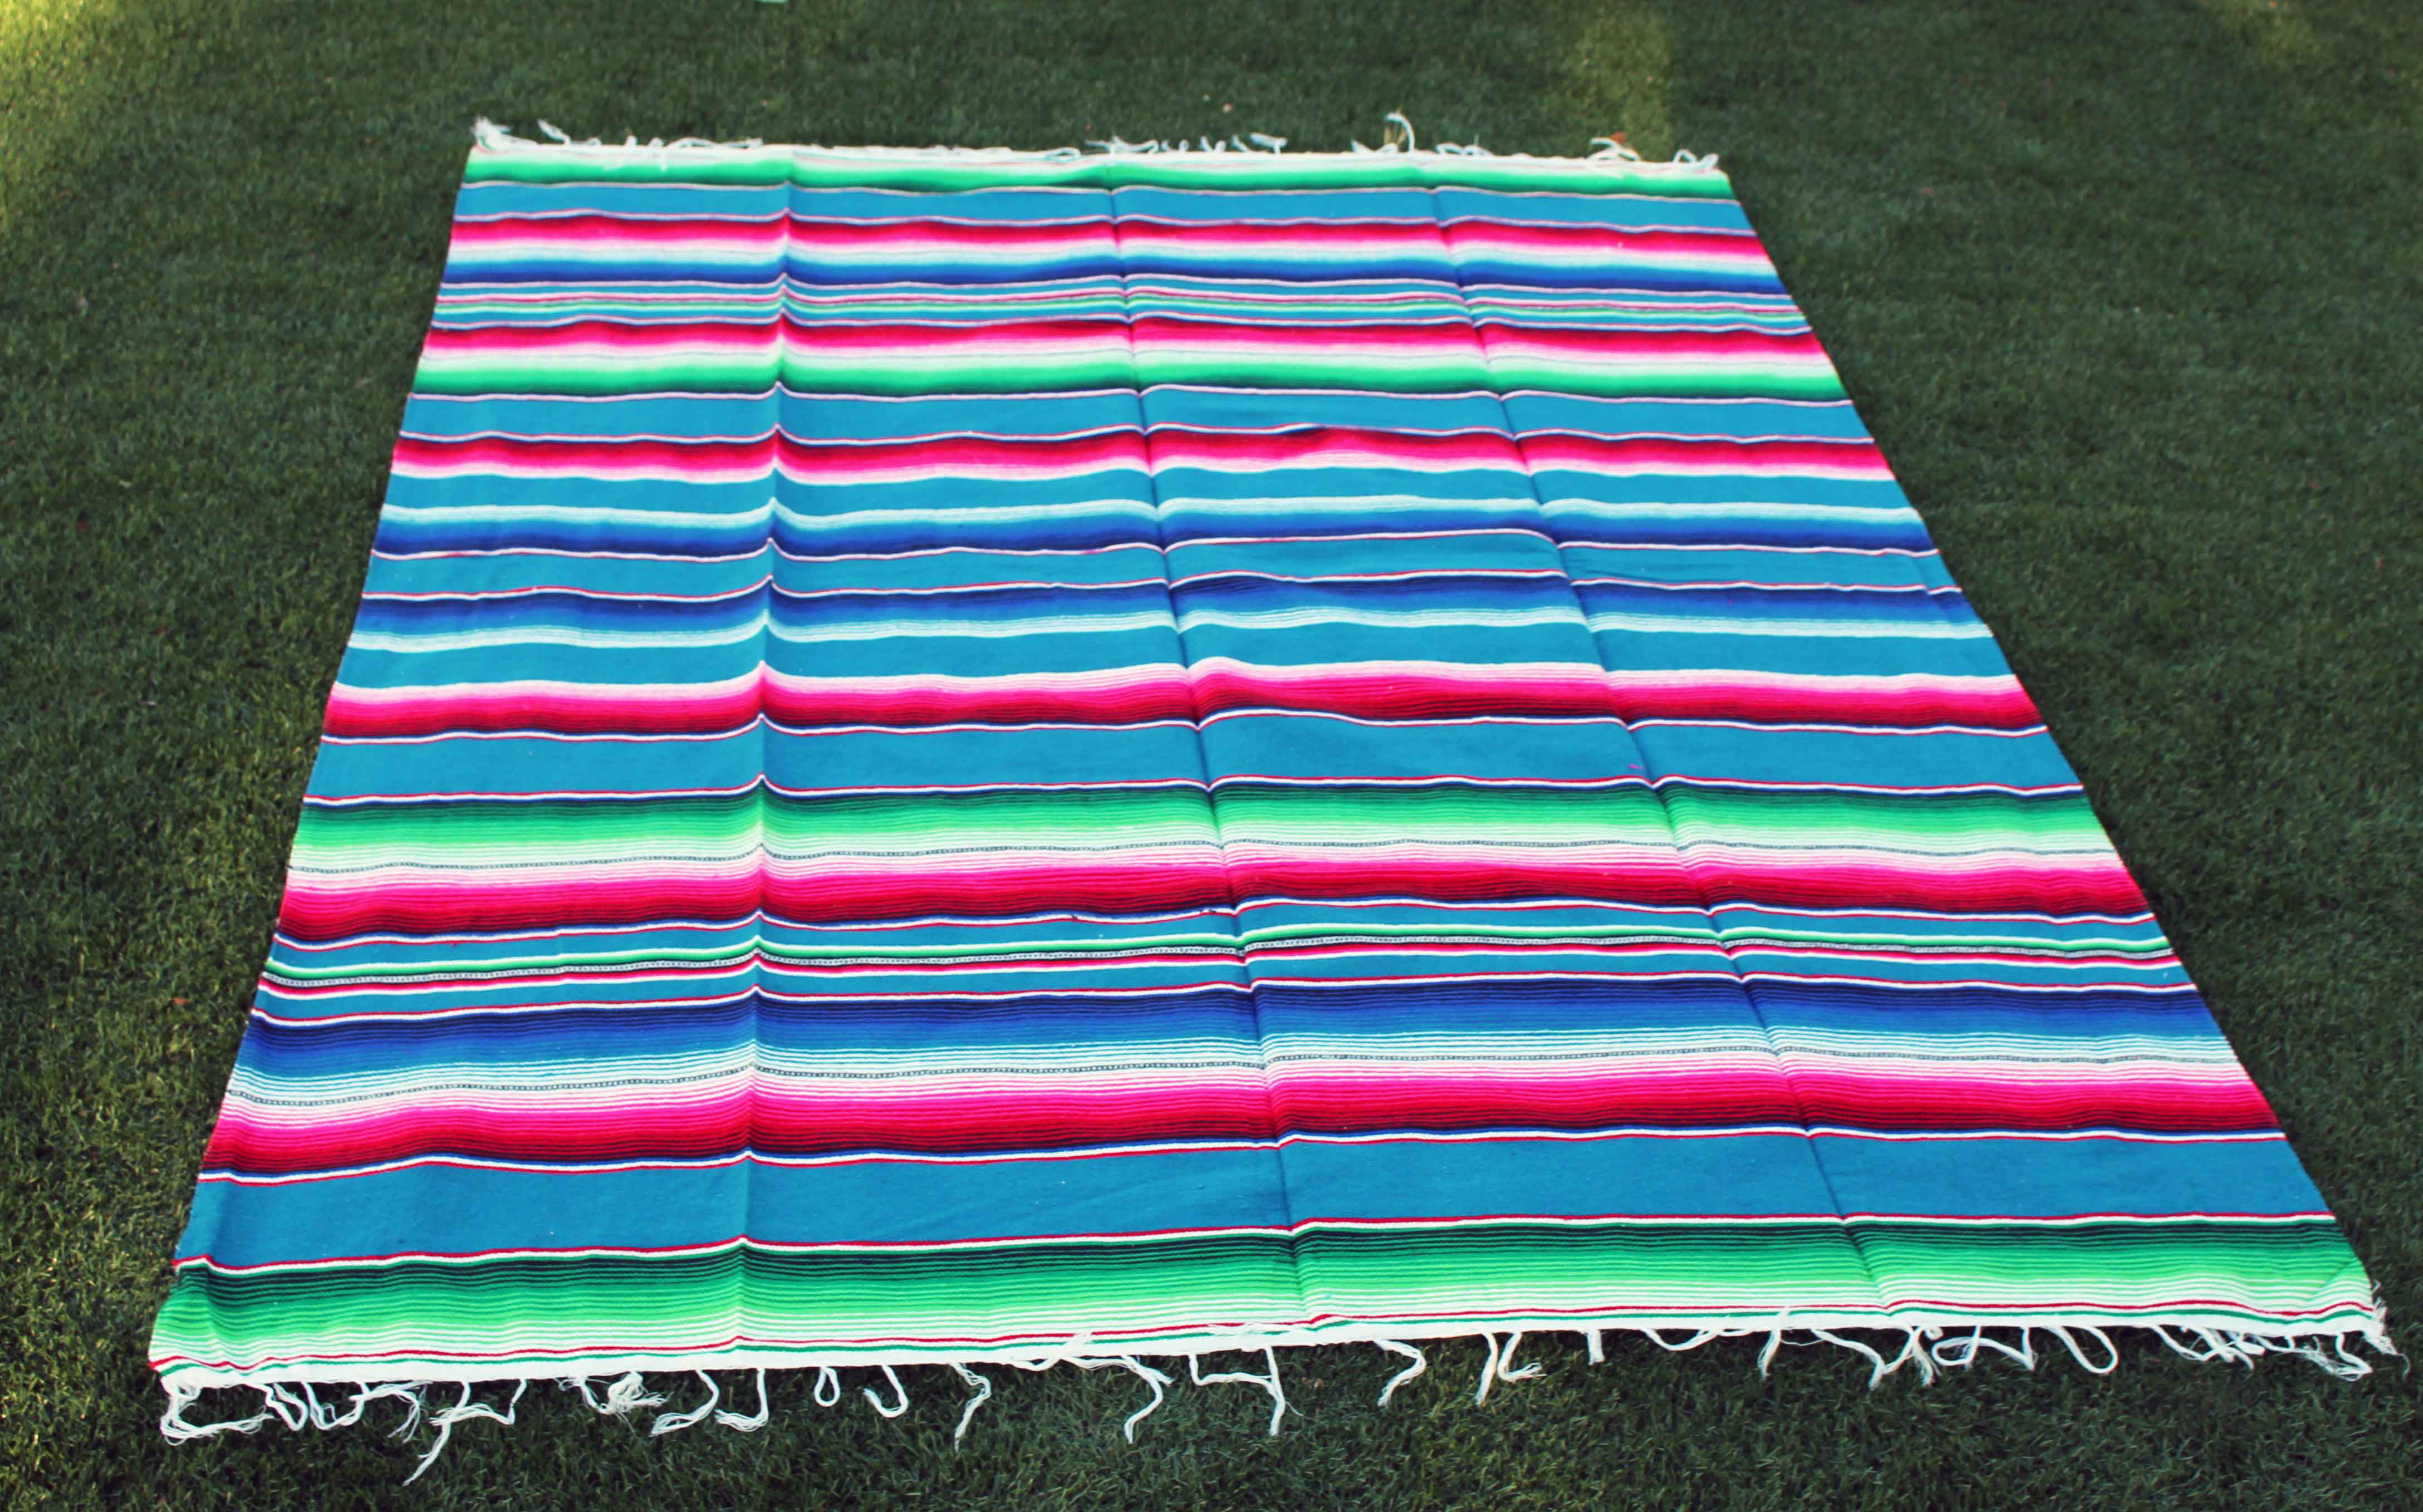 & Home Decor Music Festivals 7 Virtues Authentic Mexican Falsa Blanket Ideal for Yoga Beach Blanket Picnicking Camping Blue and Pink Bedding